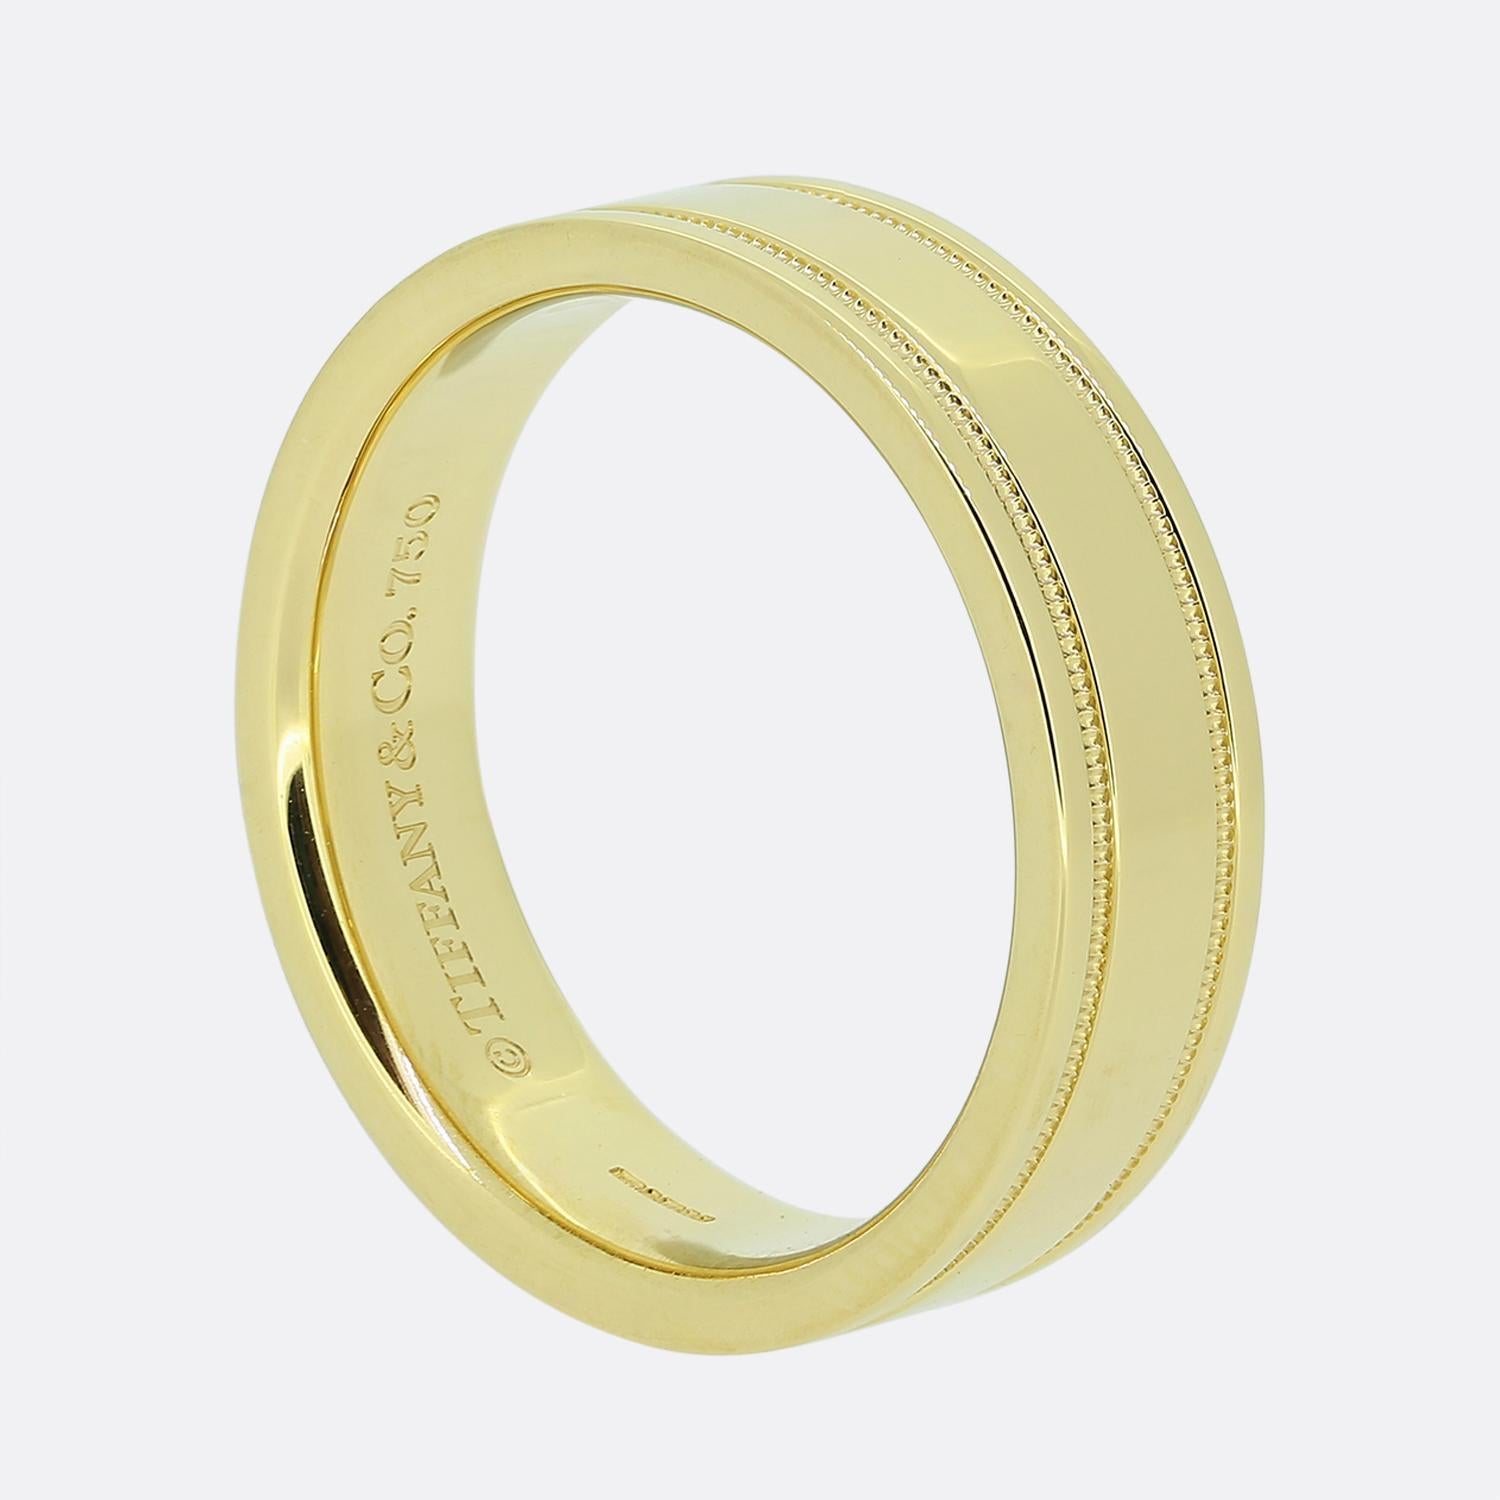 Here we have a classic wedding band ring from the world renowned jewellery designer, Tiffany & Co. This piece has been crafted from 18ct yellow gold, is 6mm in width and showcases a timeless two row milgrain design with a plain polished